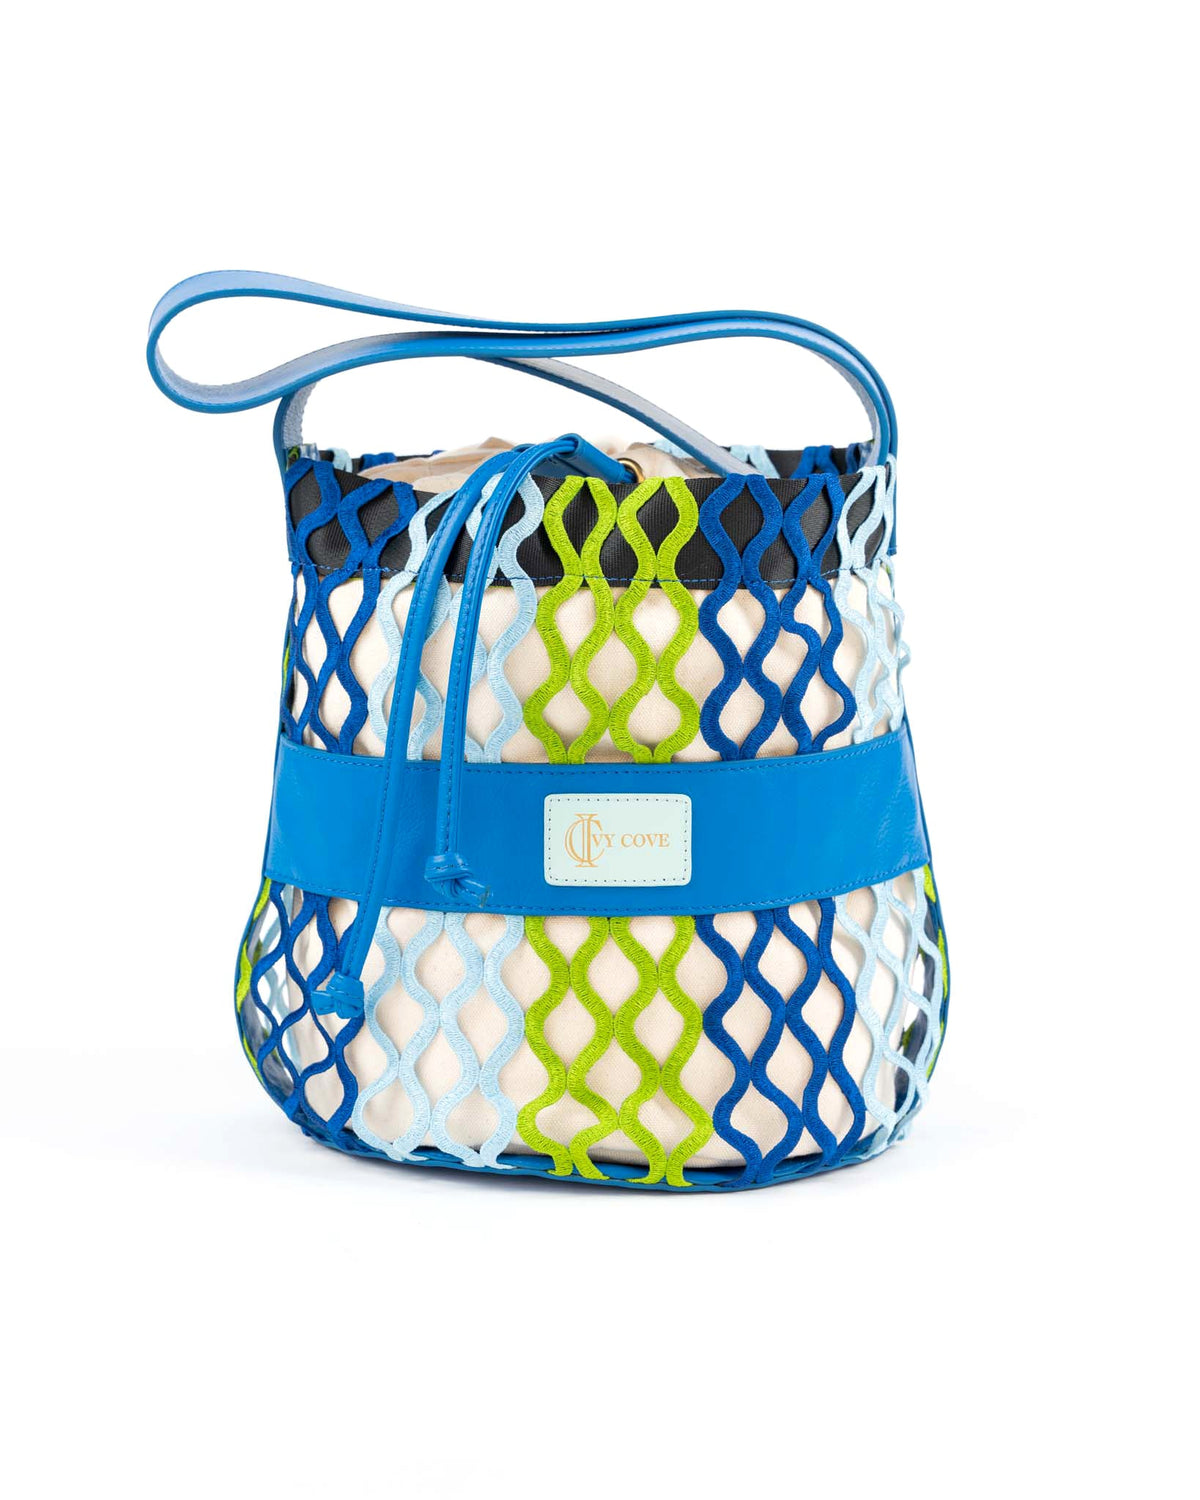 Seabed Bucket Bag - Ivy Cove Montecito